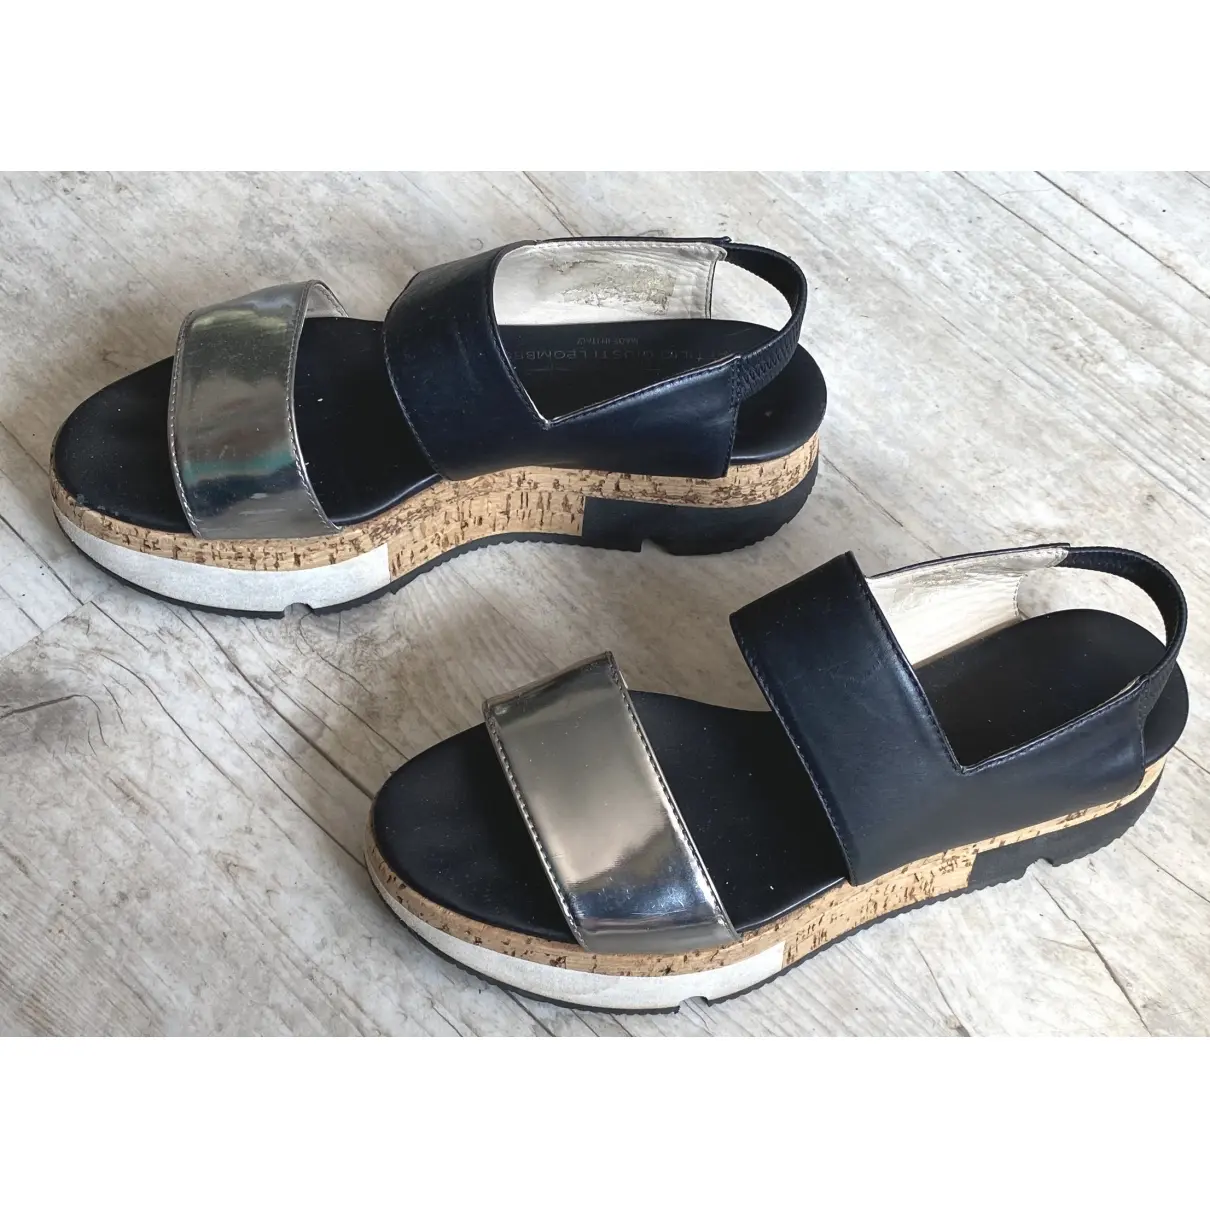 Buy Agl Leather sandals online